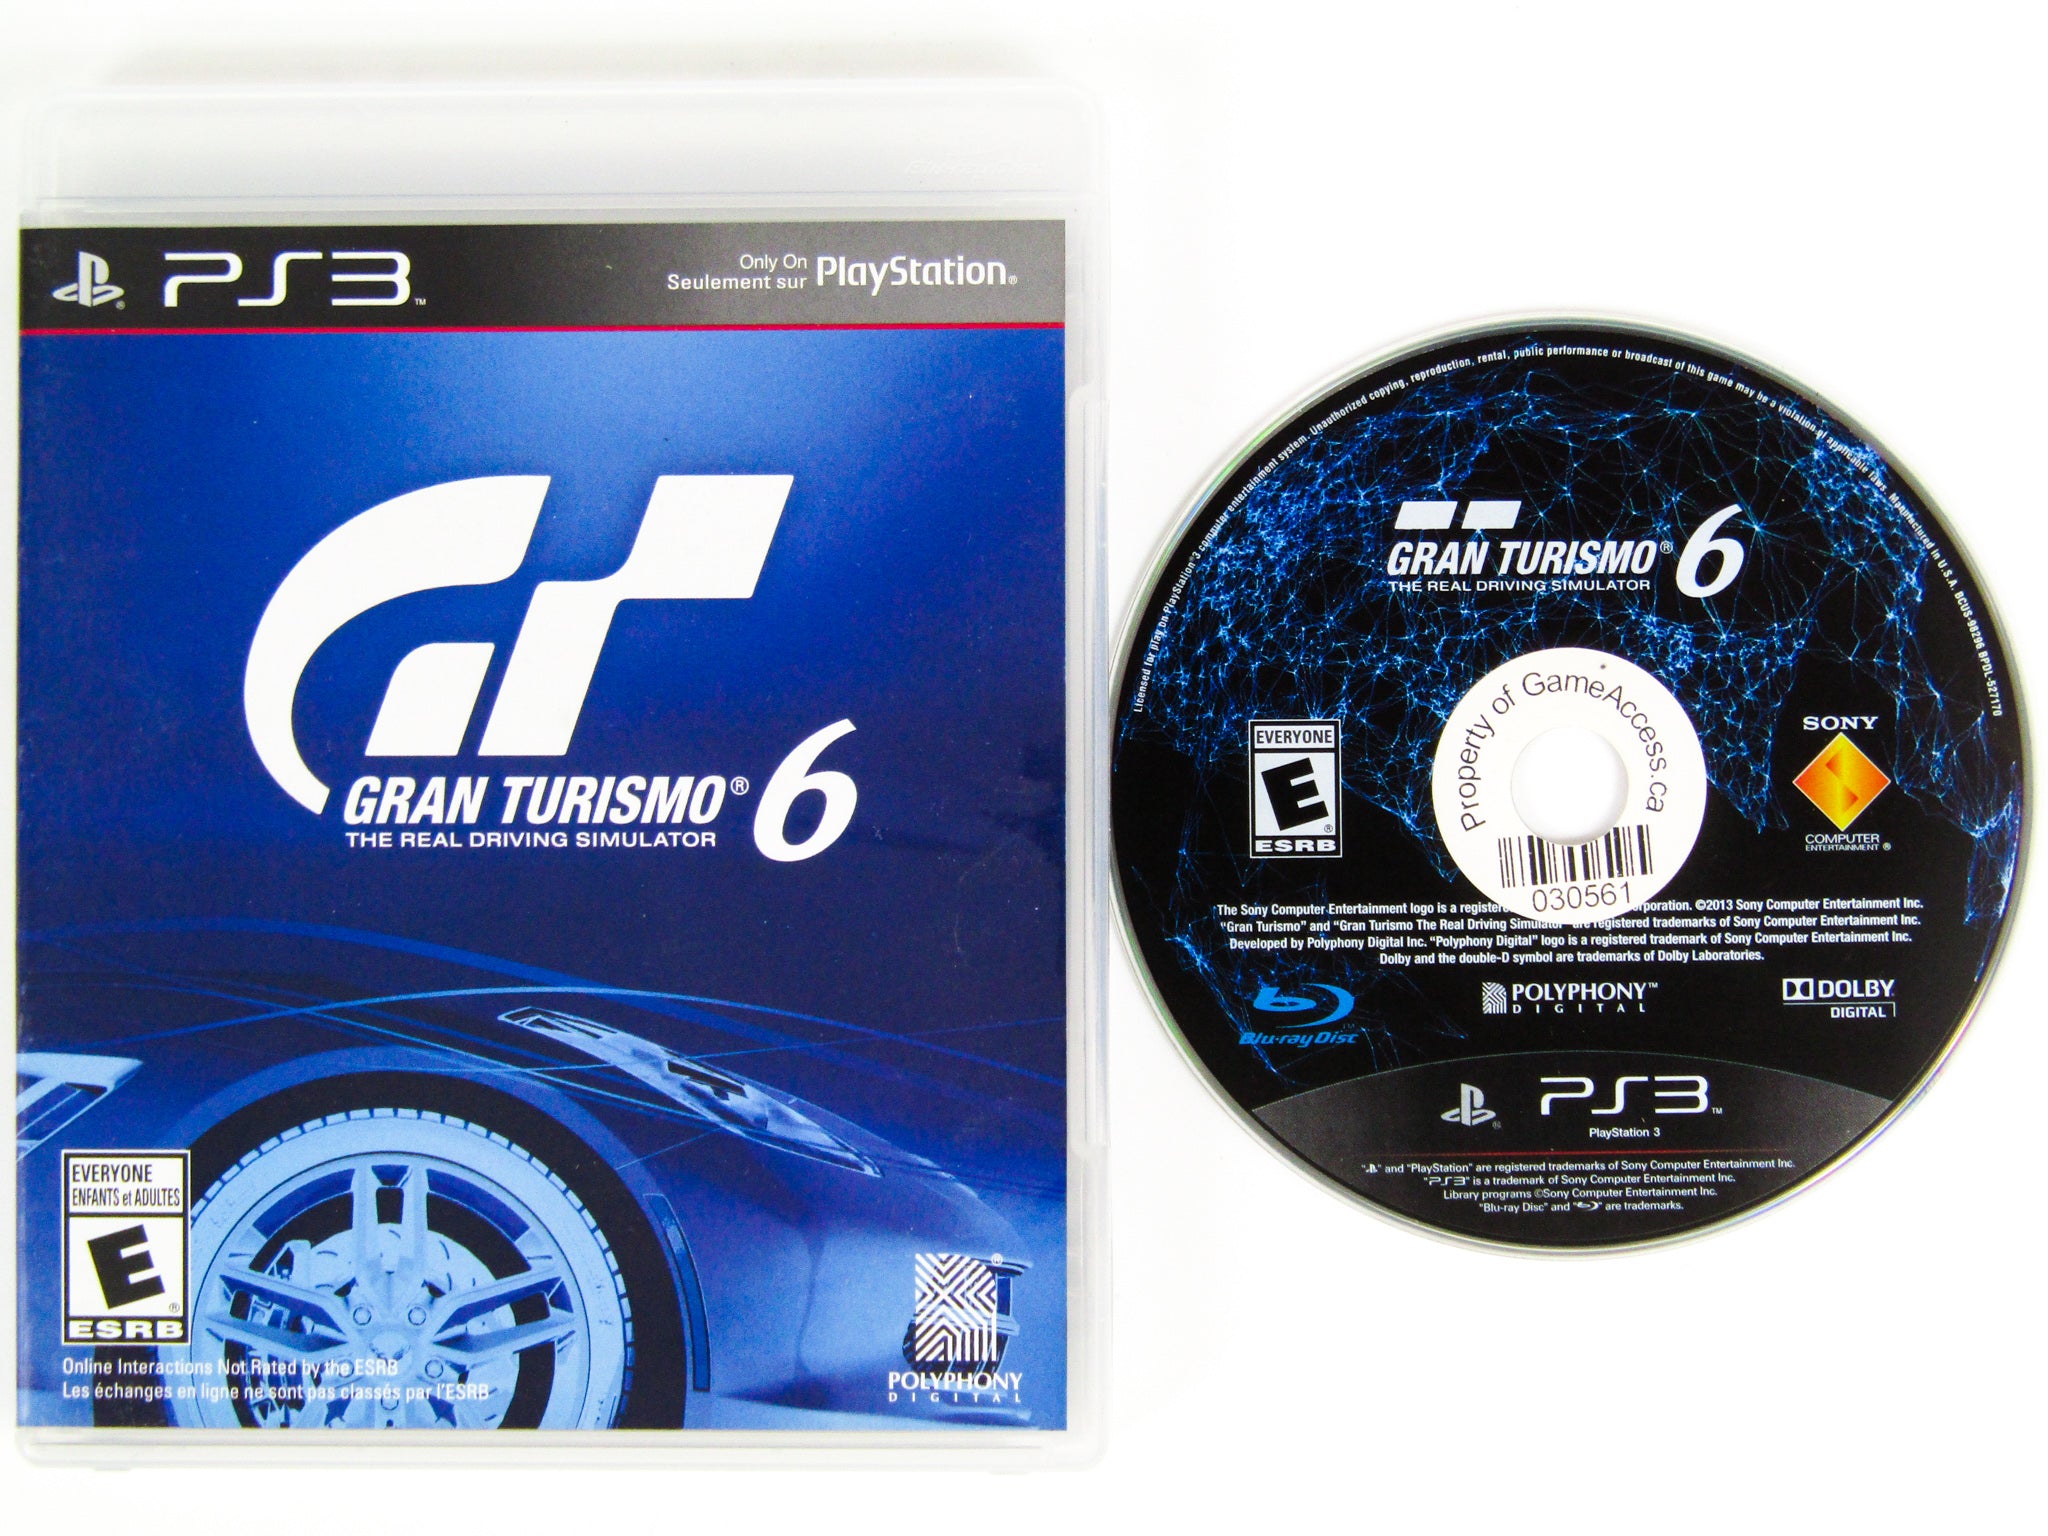 MINT DISC! Gran Turismo 6 PS3 (Sony PlayStation 3, 2013) Case & Disc  Game Tested 711719208280